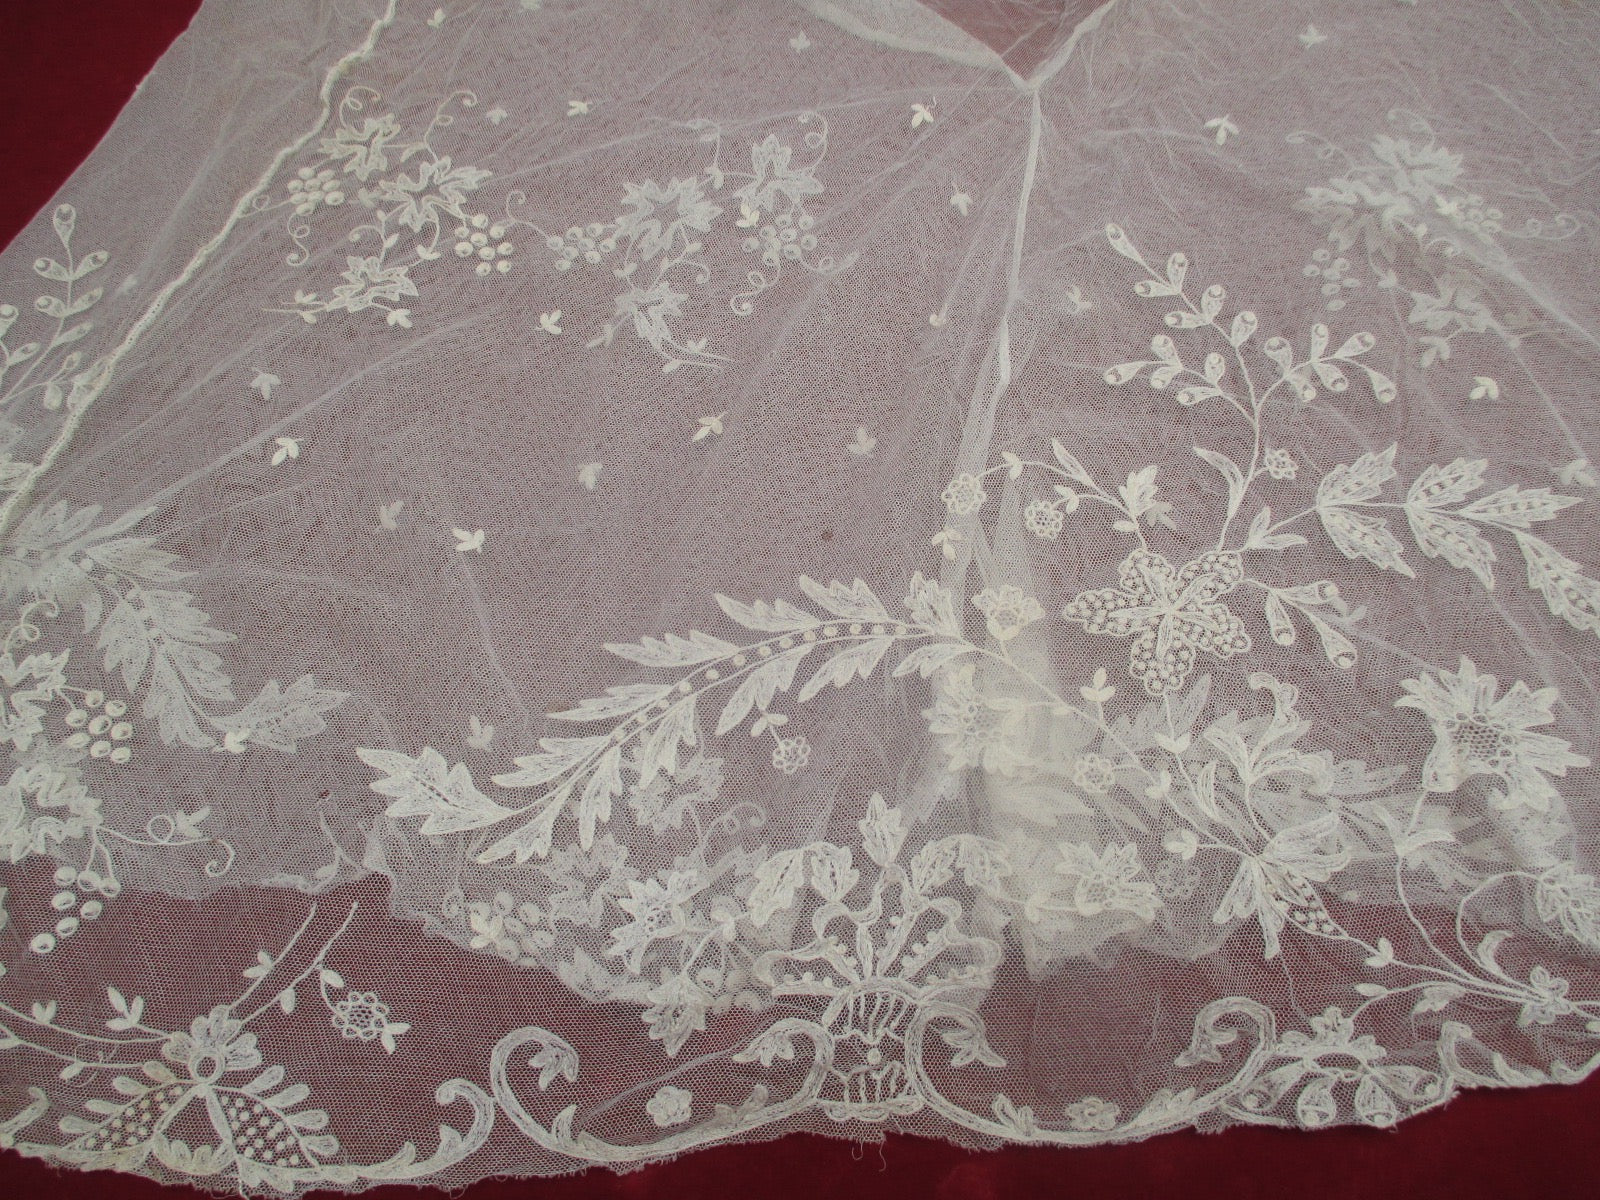 Antique Edwardian Tambour embroidered net lace